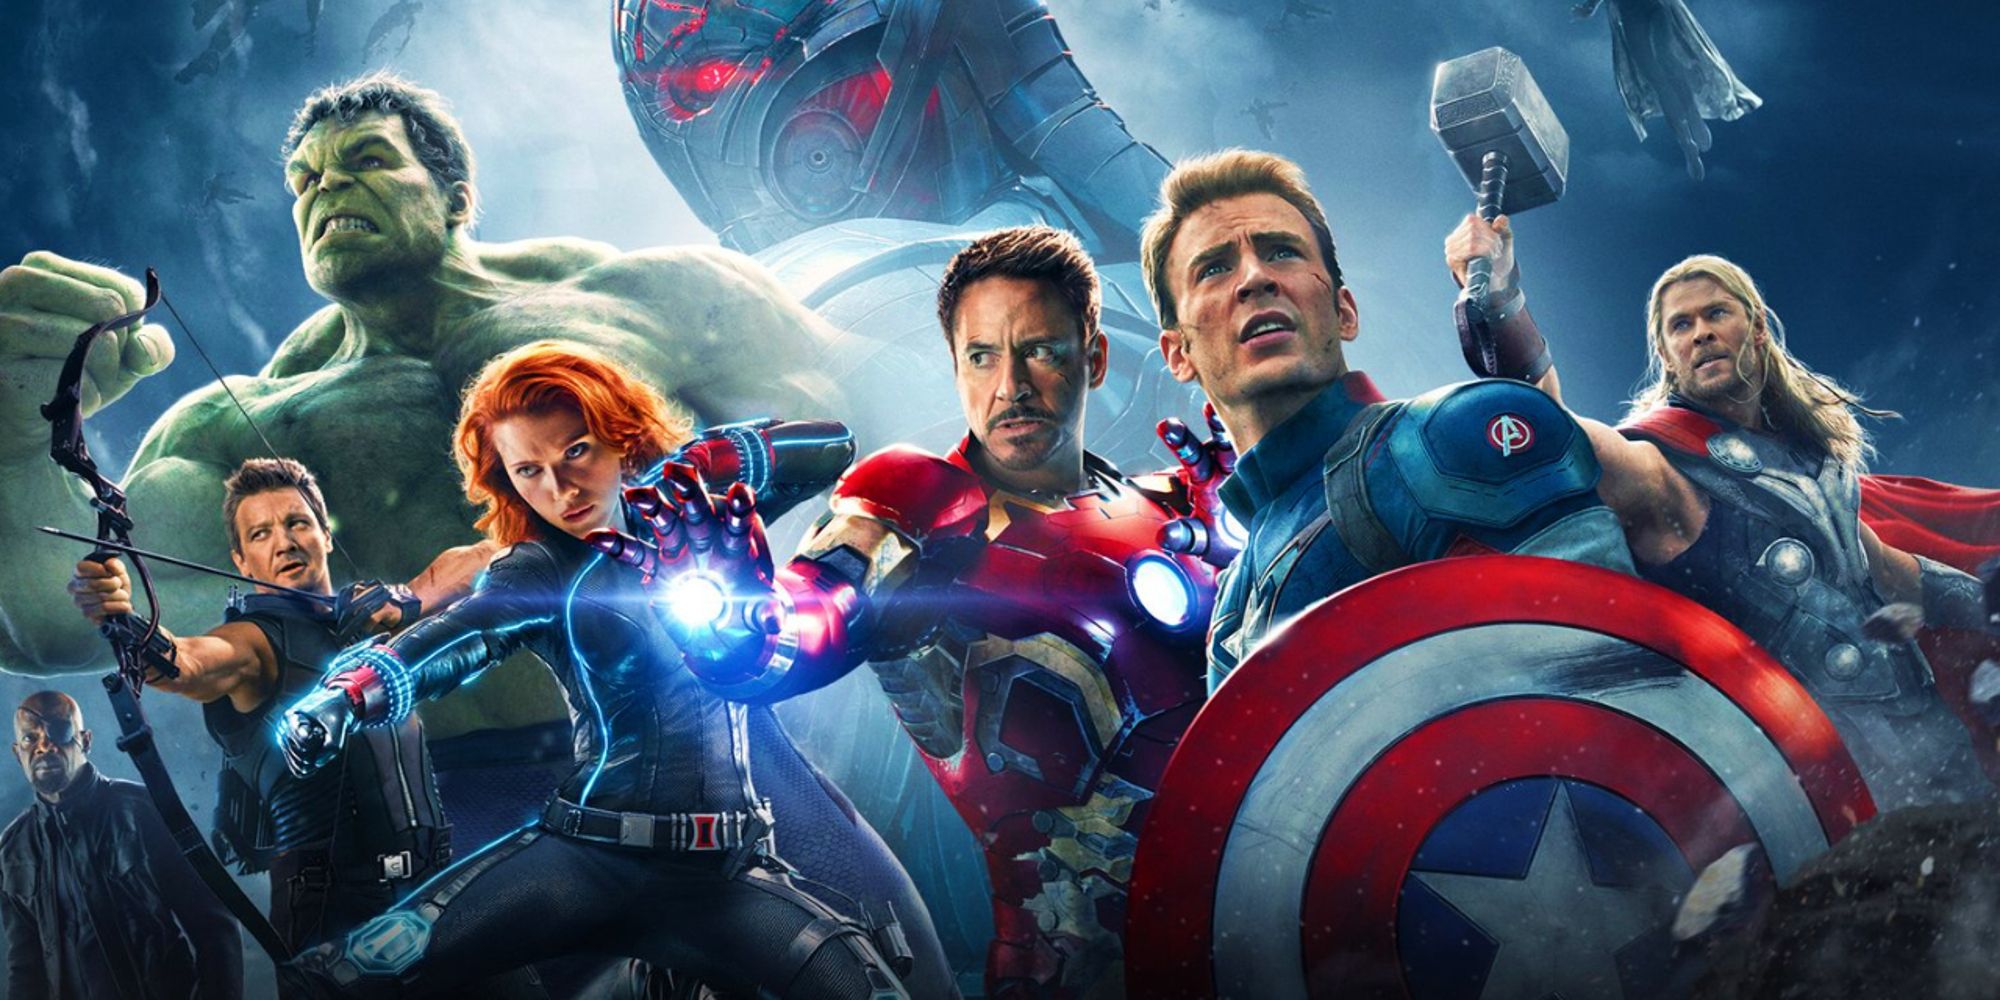 The original six Avengers posing in the poster for Avengers: Age of Ultron